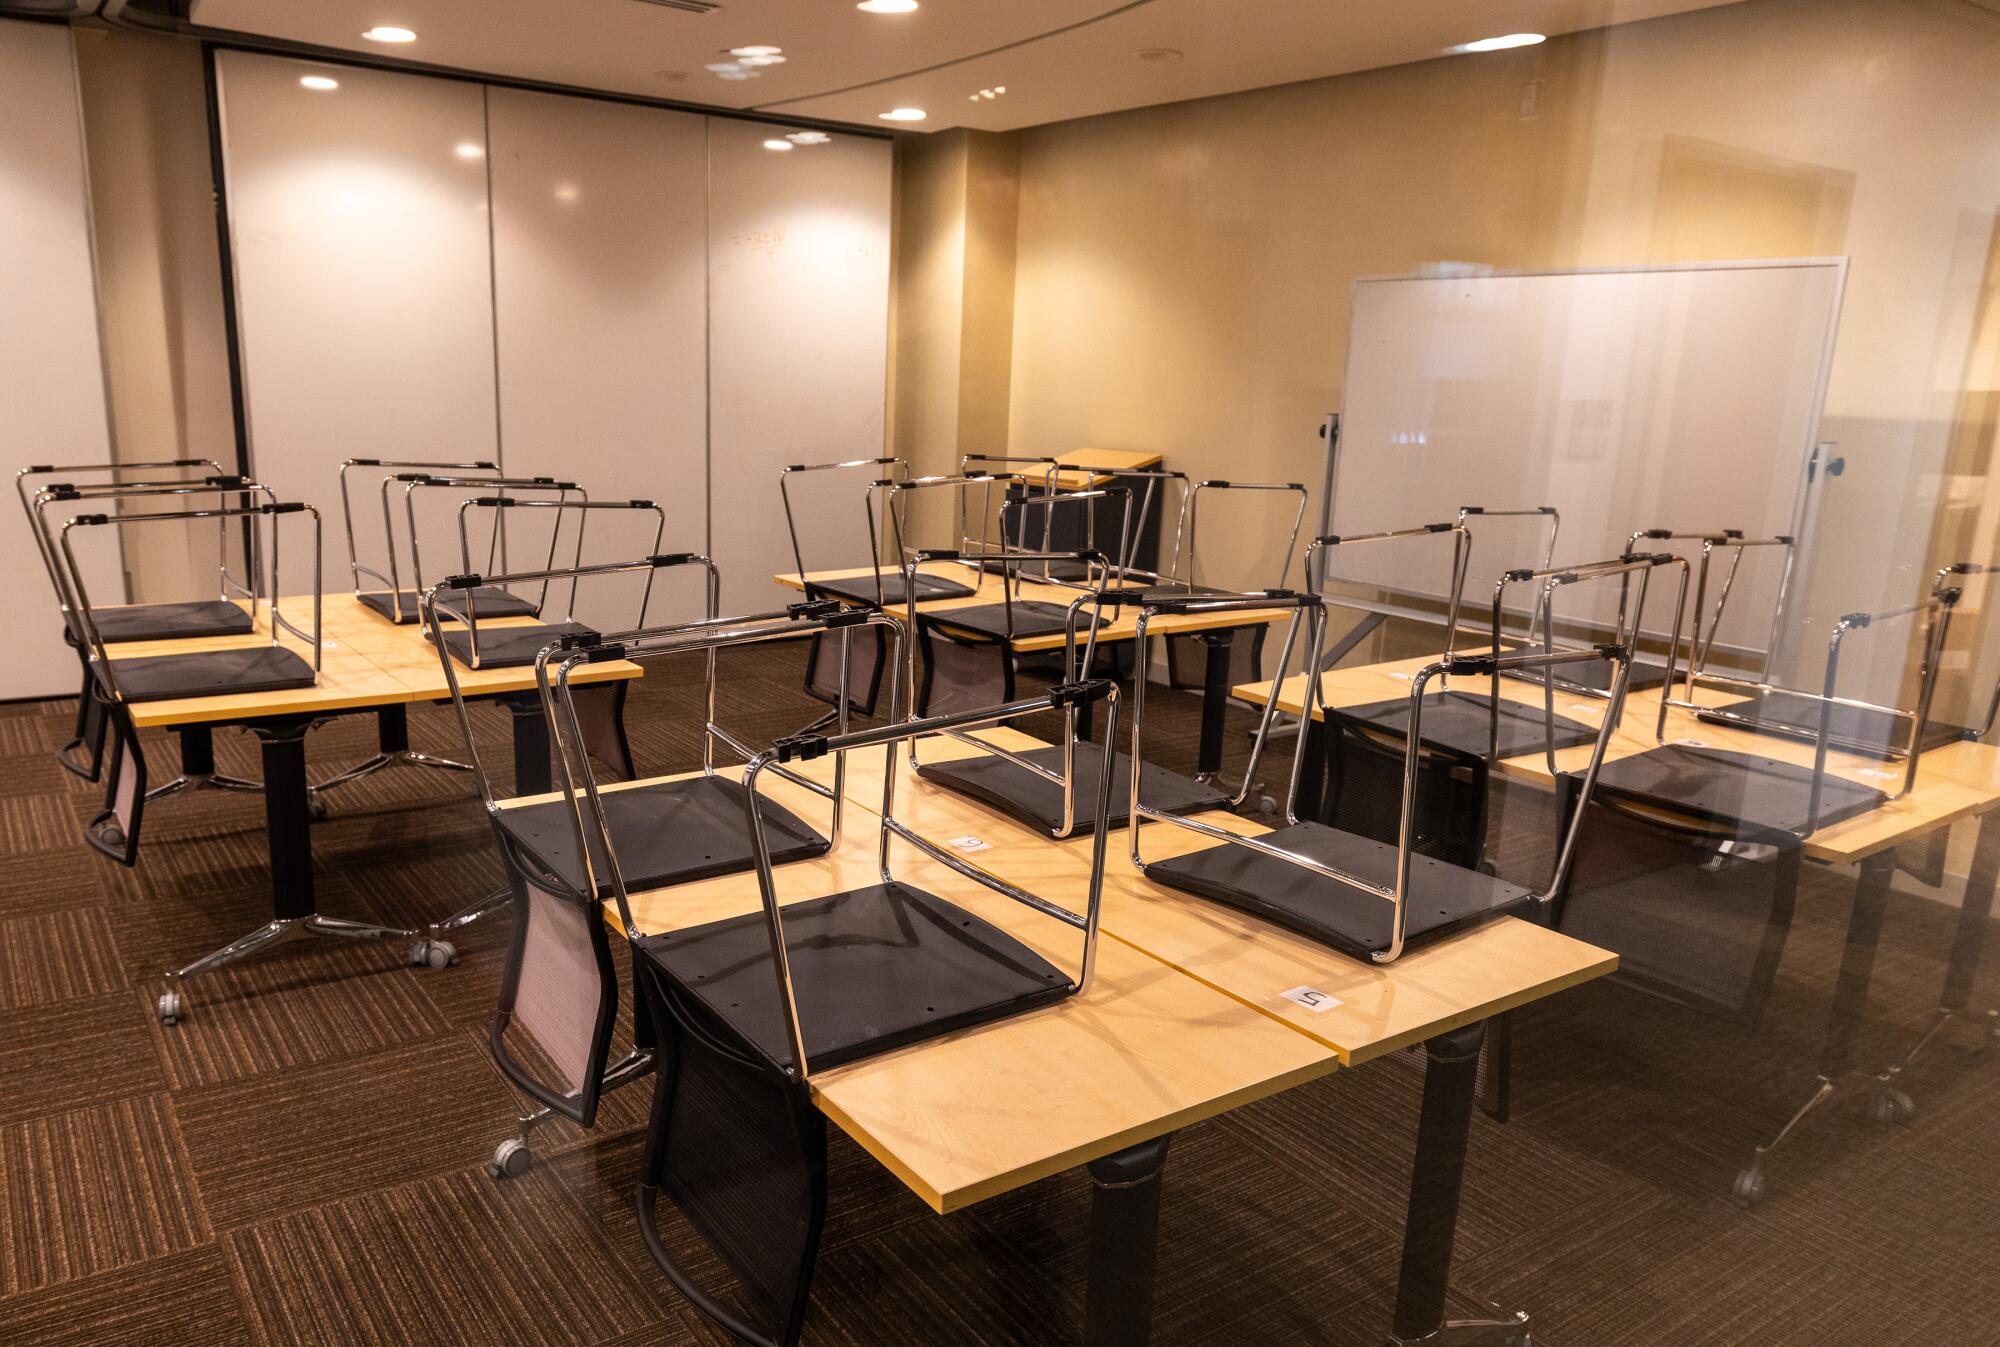 An empty classroom with chairs on desks at the Academy of Media Arts.